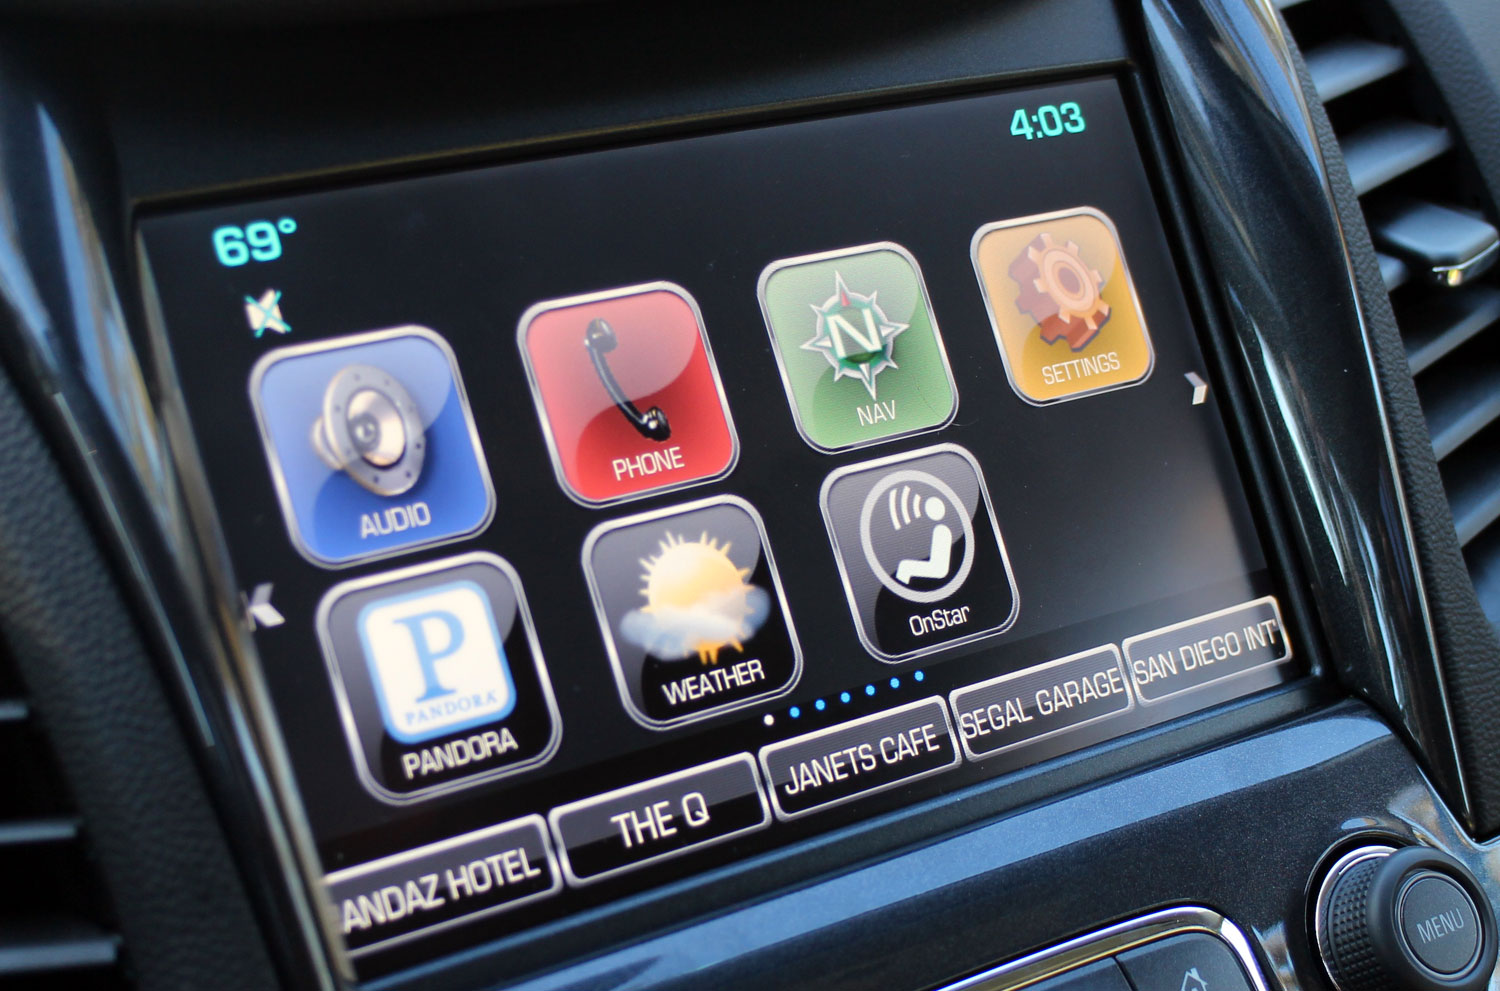 2014 chevrolet mylink voice recognition technology